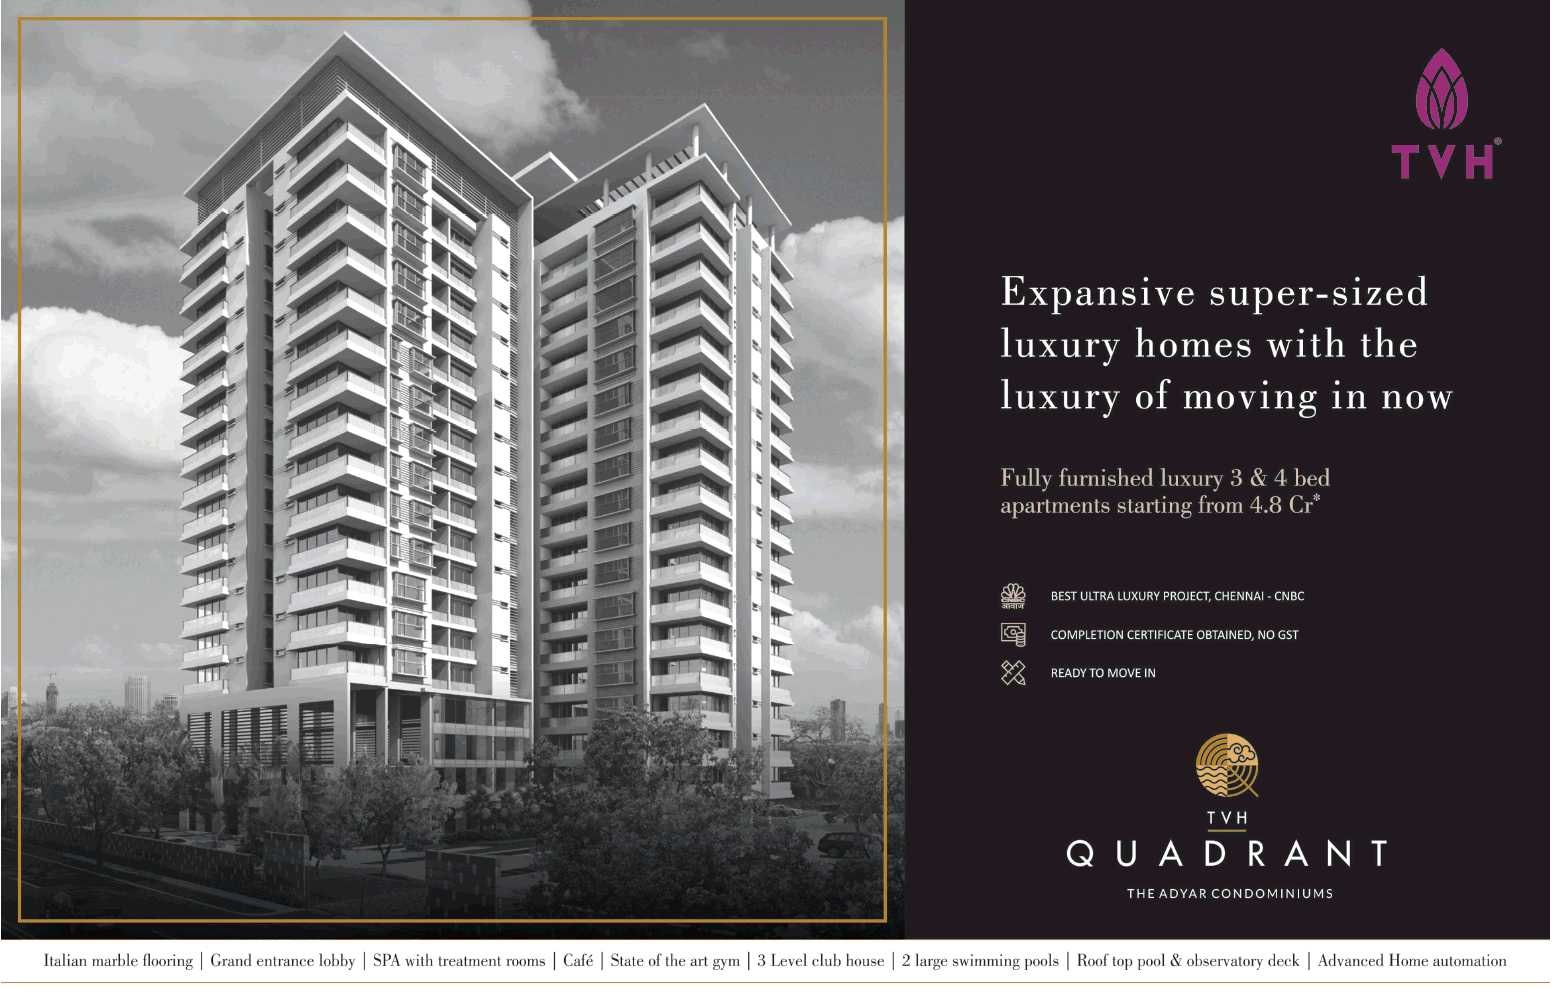 Book fully furnished luxury 3 & 4 bhk apartments at TVH Quadrant in Chennai